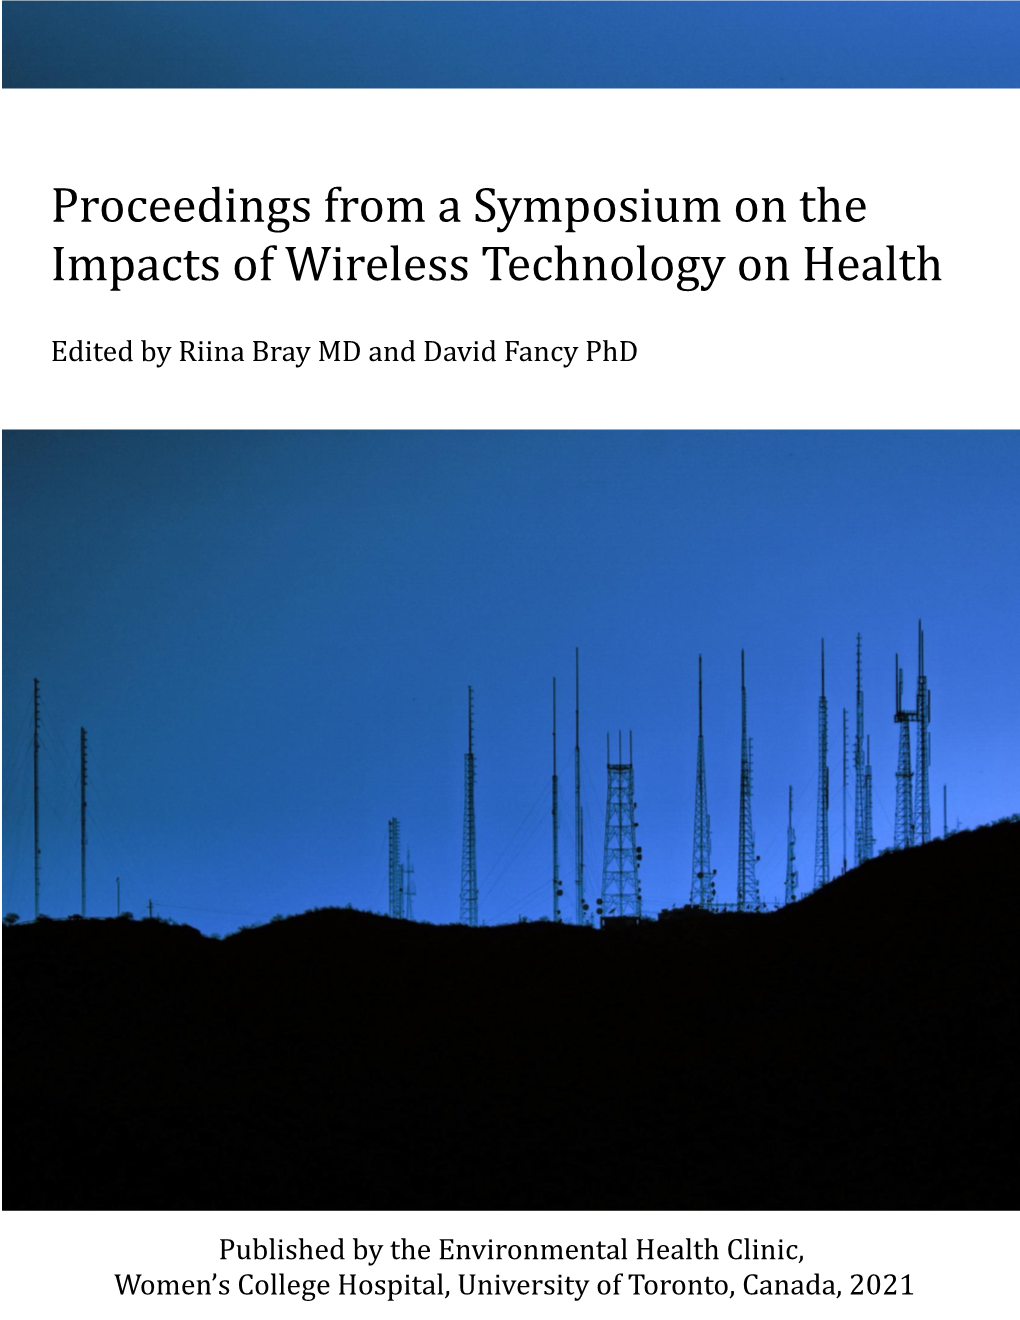 Proceedings from a Symposium on the Impacts of Wireless Technology on Health